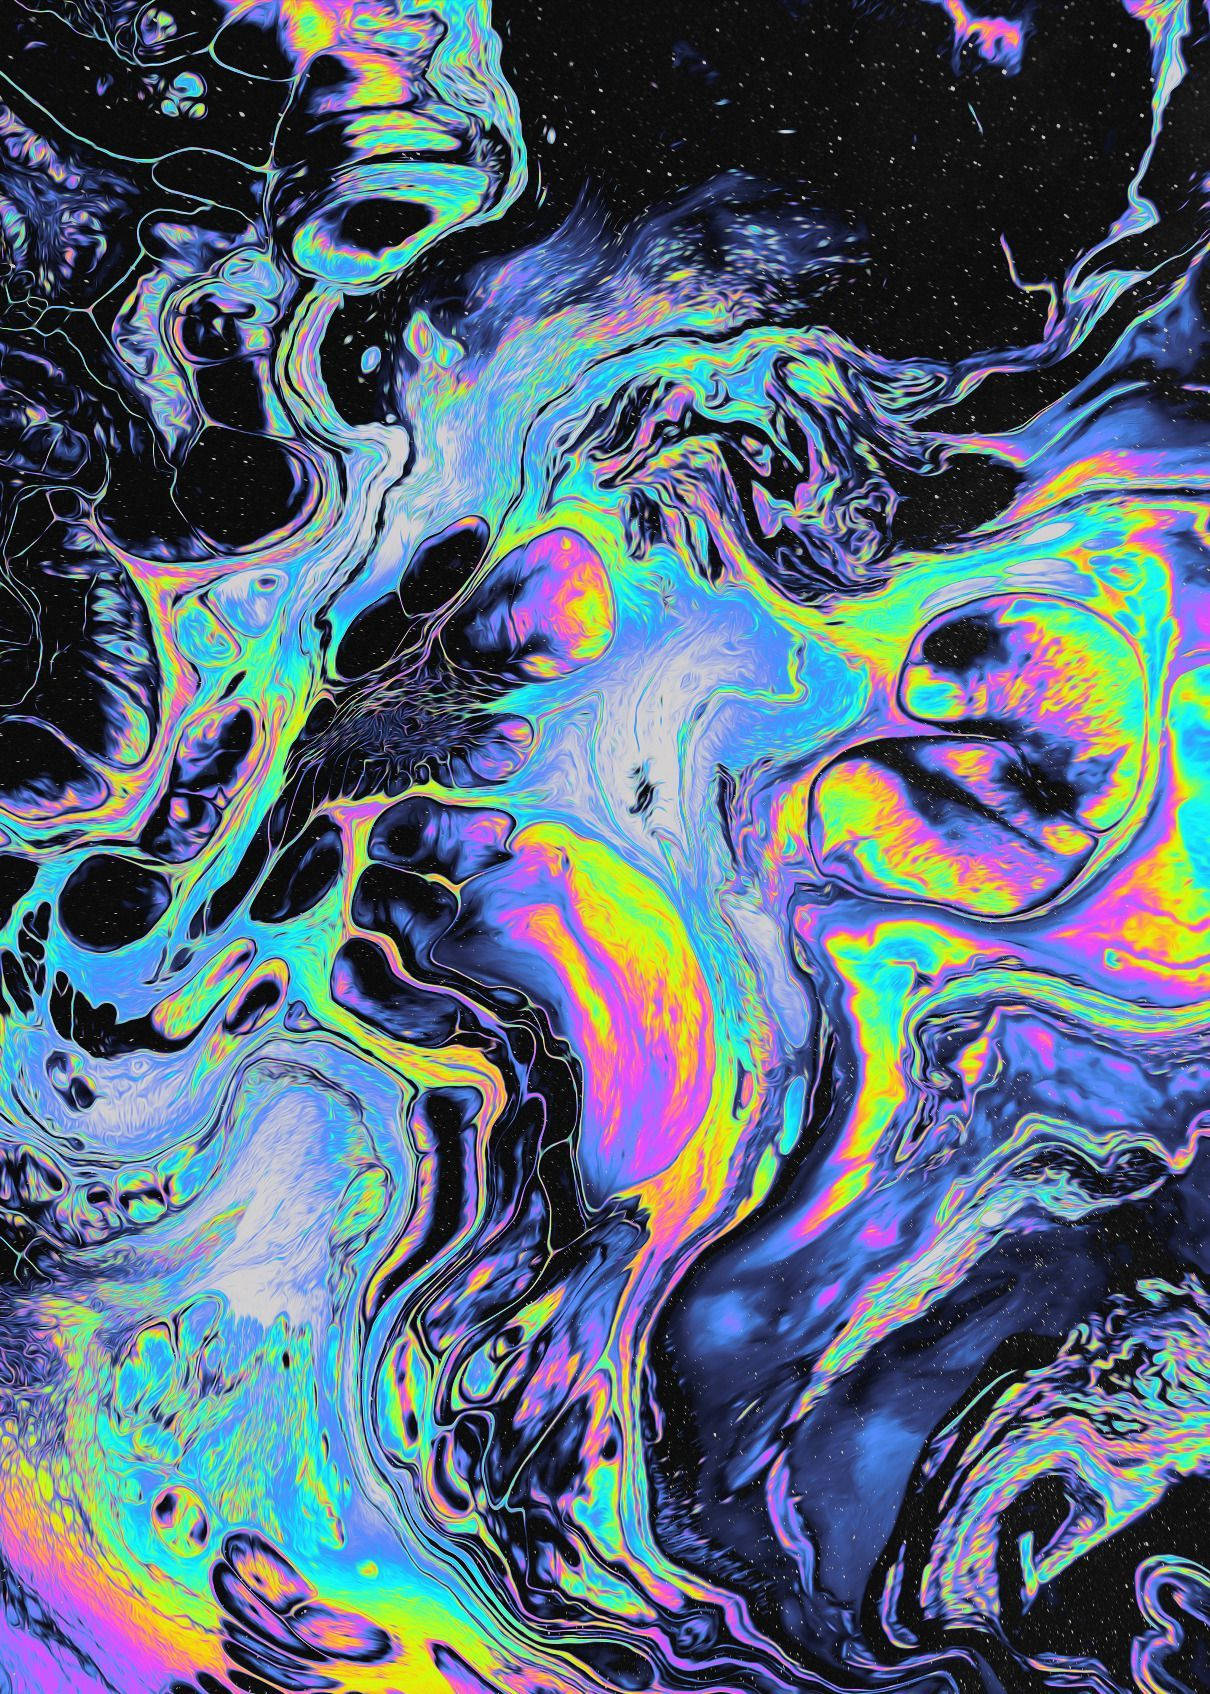 A Colorful Painting Of A Liquid With Swirls Wallpaper